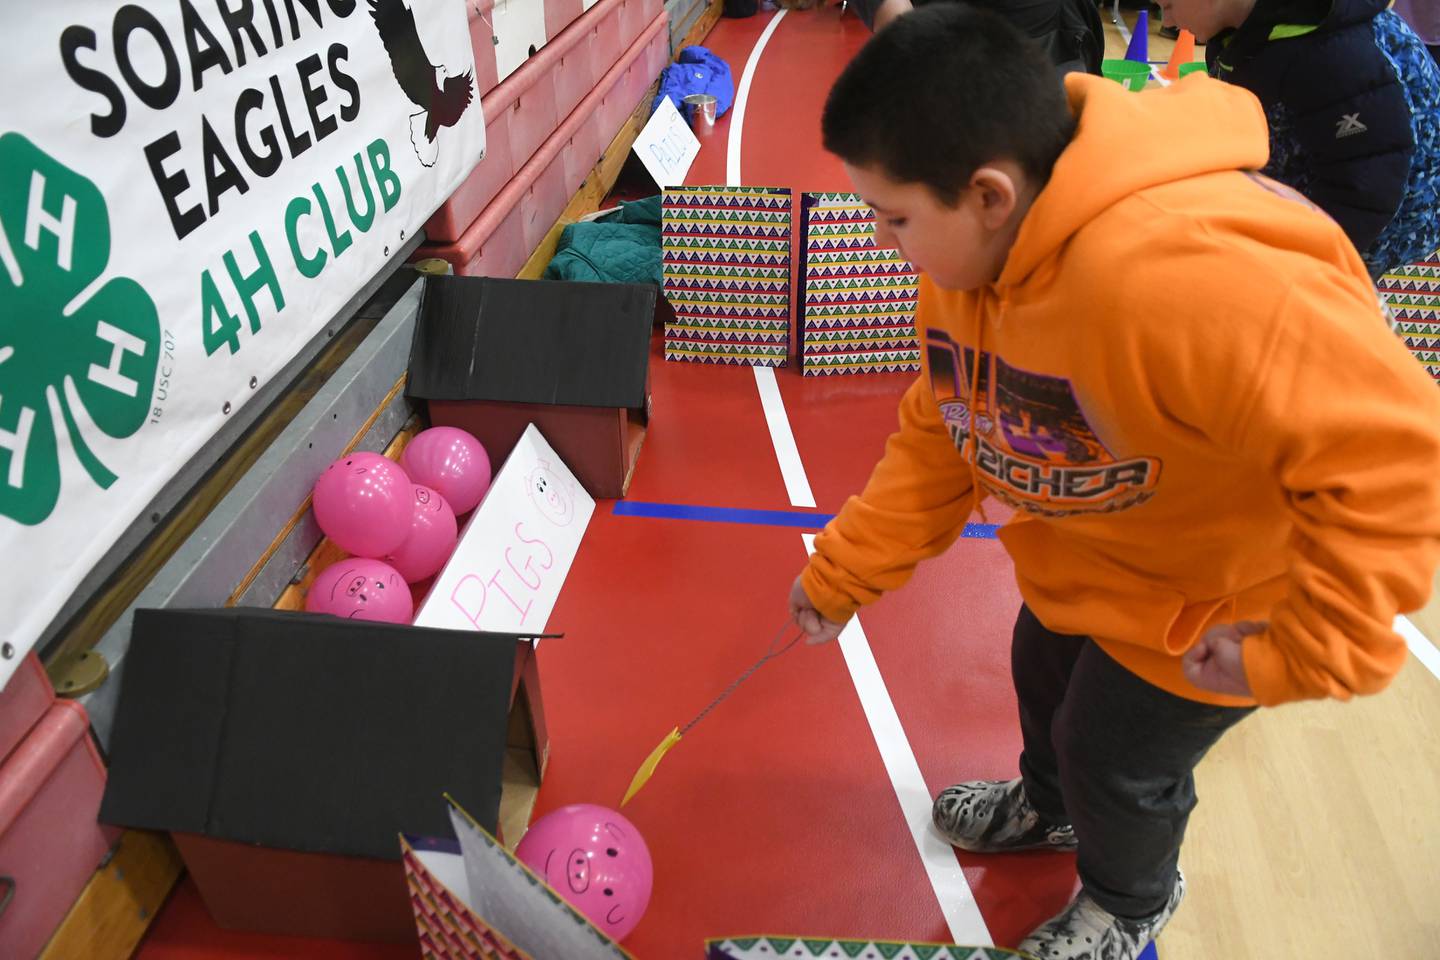 Connor Clark, 8, of Rochelle herds a balloon pig into its pen with a fly swatter at the Leaf River Soaring Eagles' booth at the 4-H Penny Carnival on Saturday, March 18.